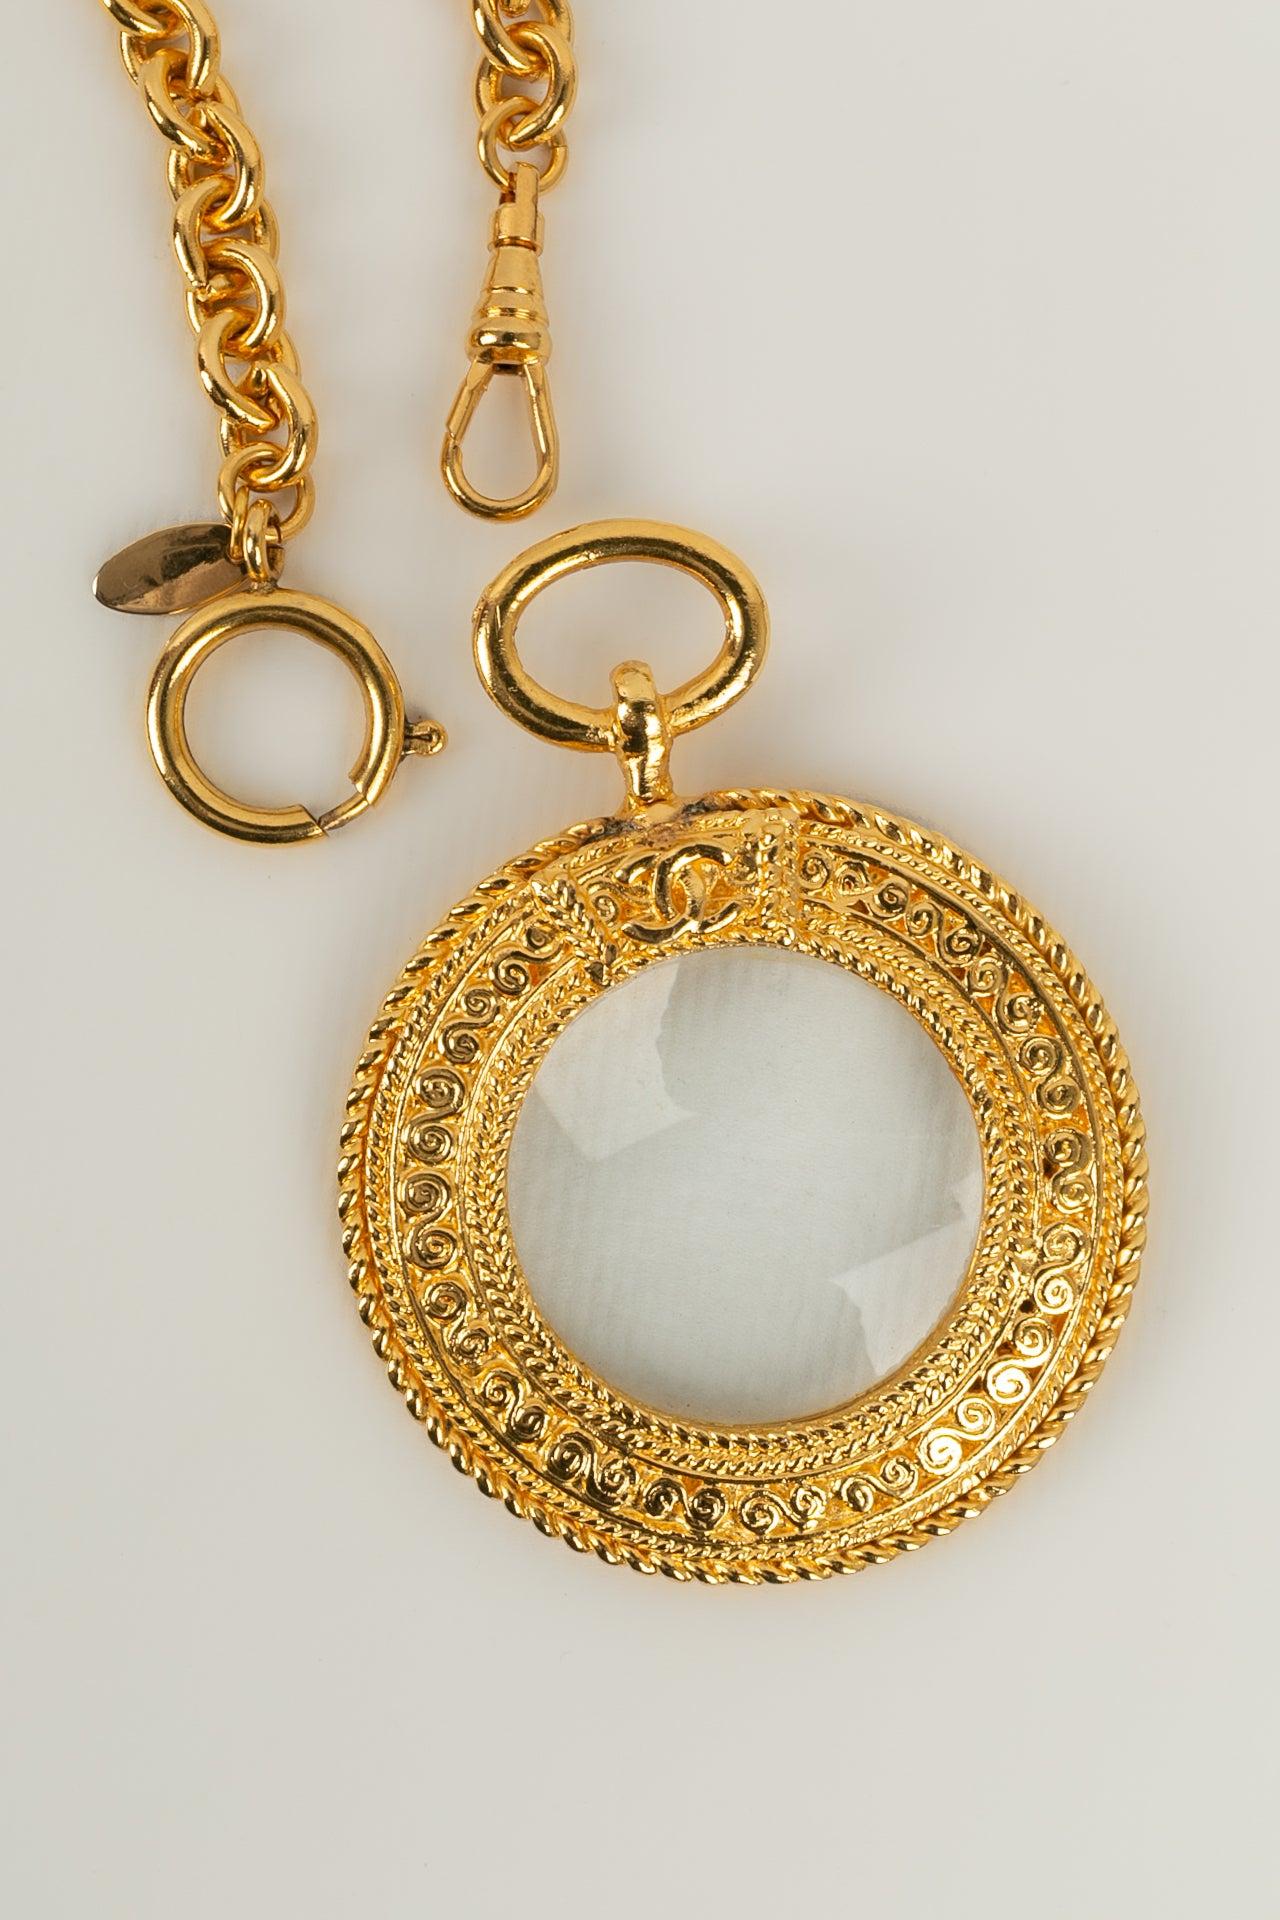 Women's Chanel Magnifying Glass Necklace in Gold Plated Metal